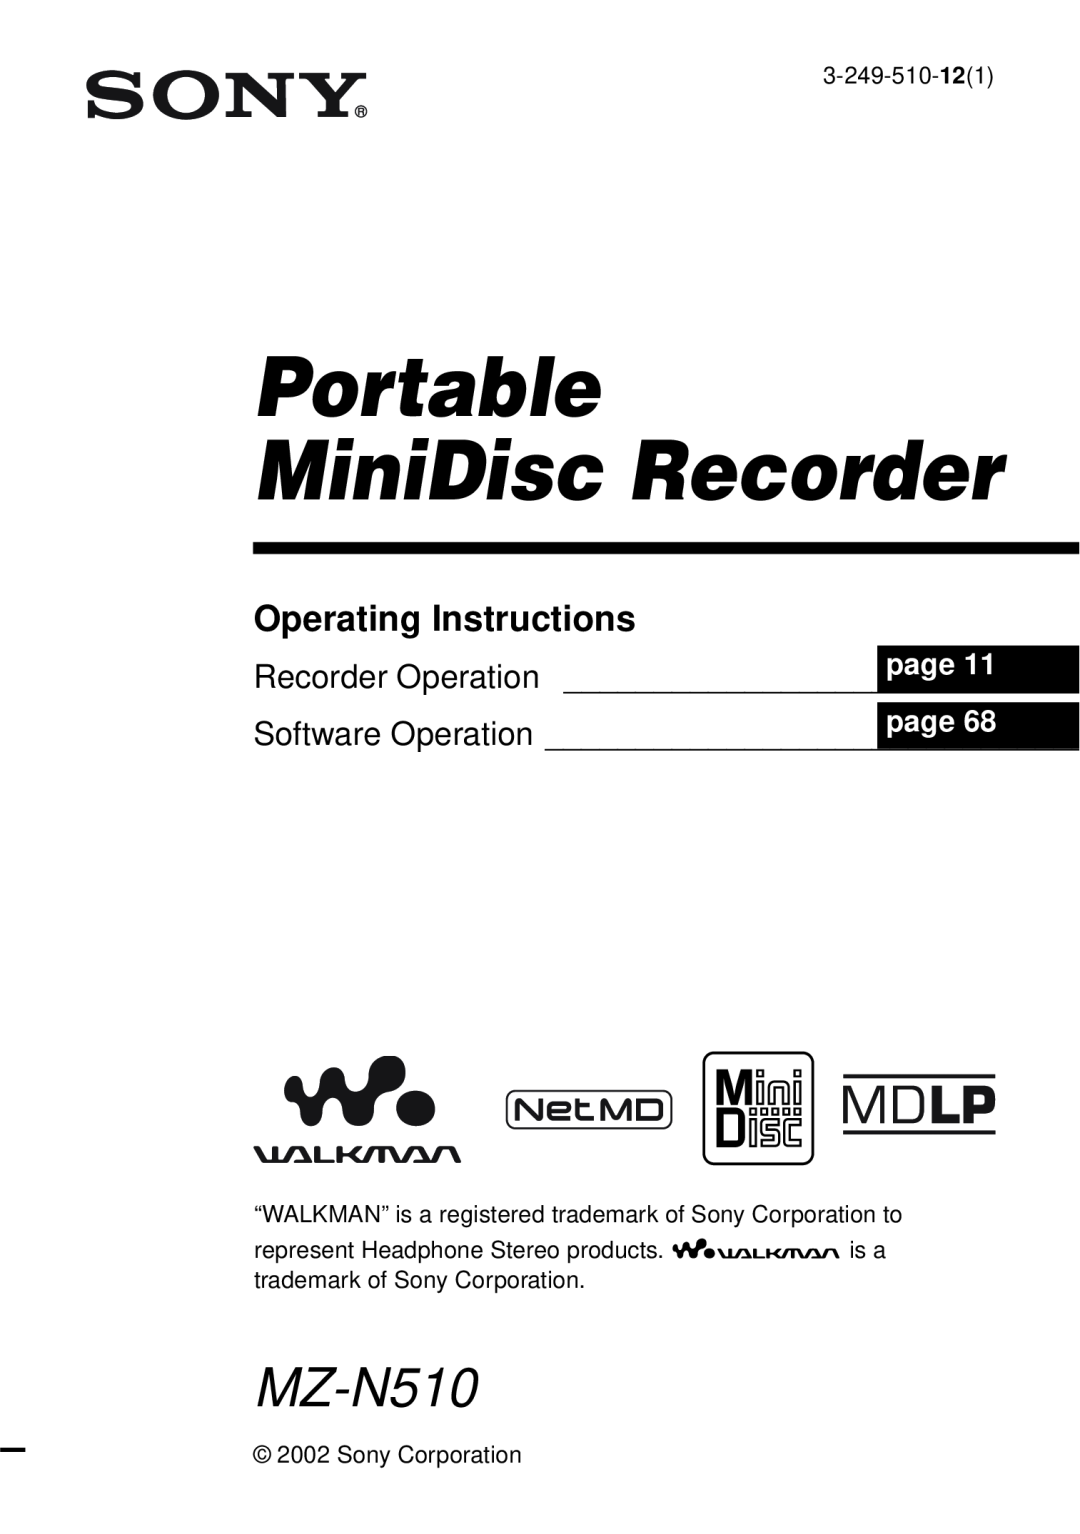 Sony MZ-N510 operating instructions Operating Instructions, Portable MiniDisc Recorder, page, 3-249-510-121 